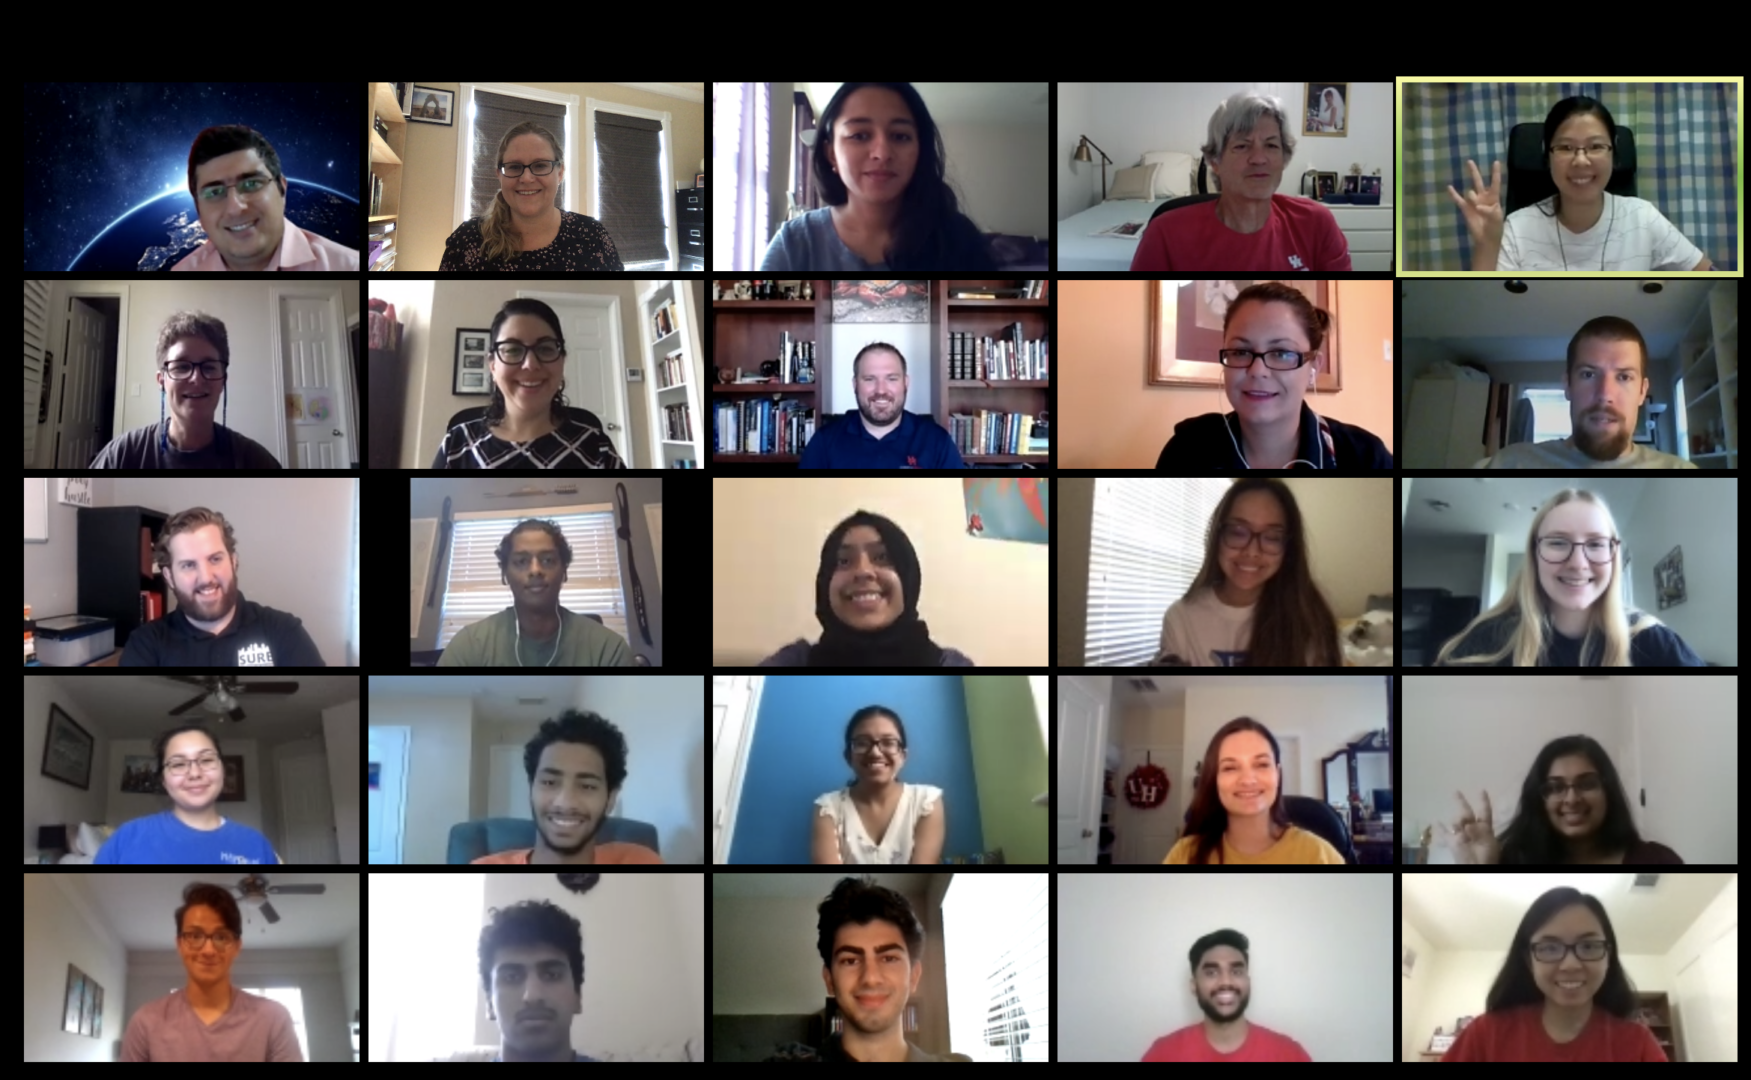 Houston Early Research Experience program participants, faculty and staff have been operating virtually due to the coronavirus pandemic, meeting on Zoom. | Courtesy of Rikki Bettinger